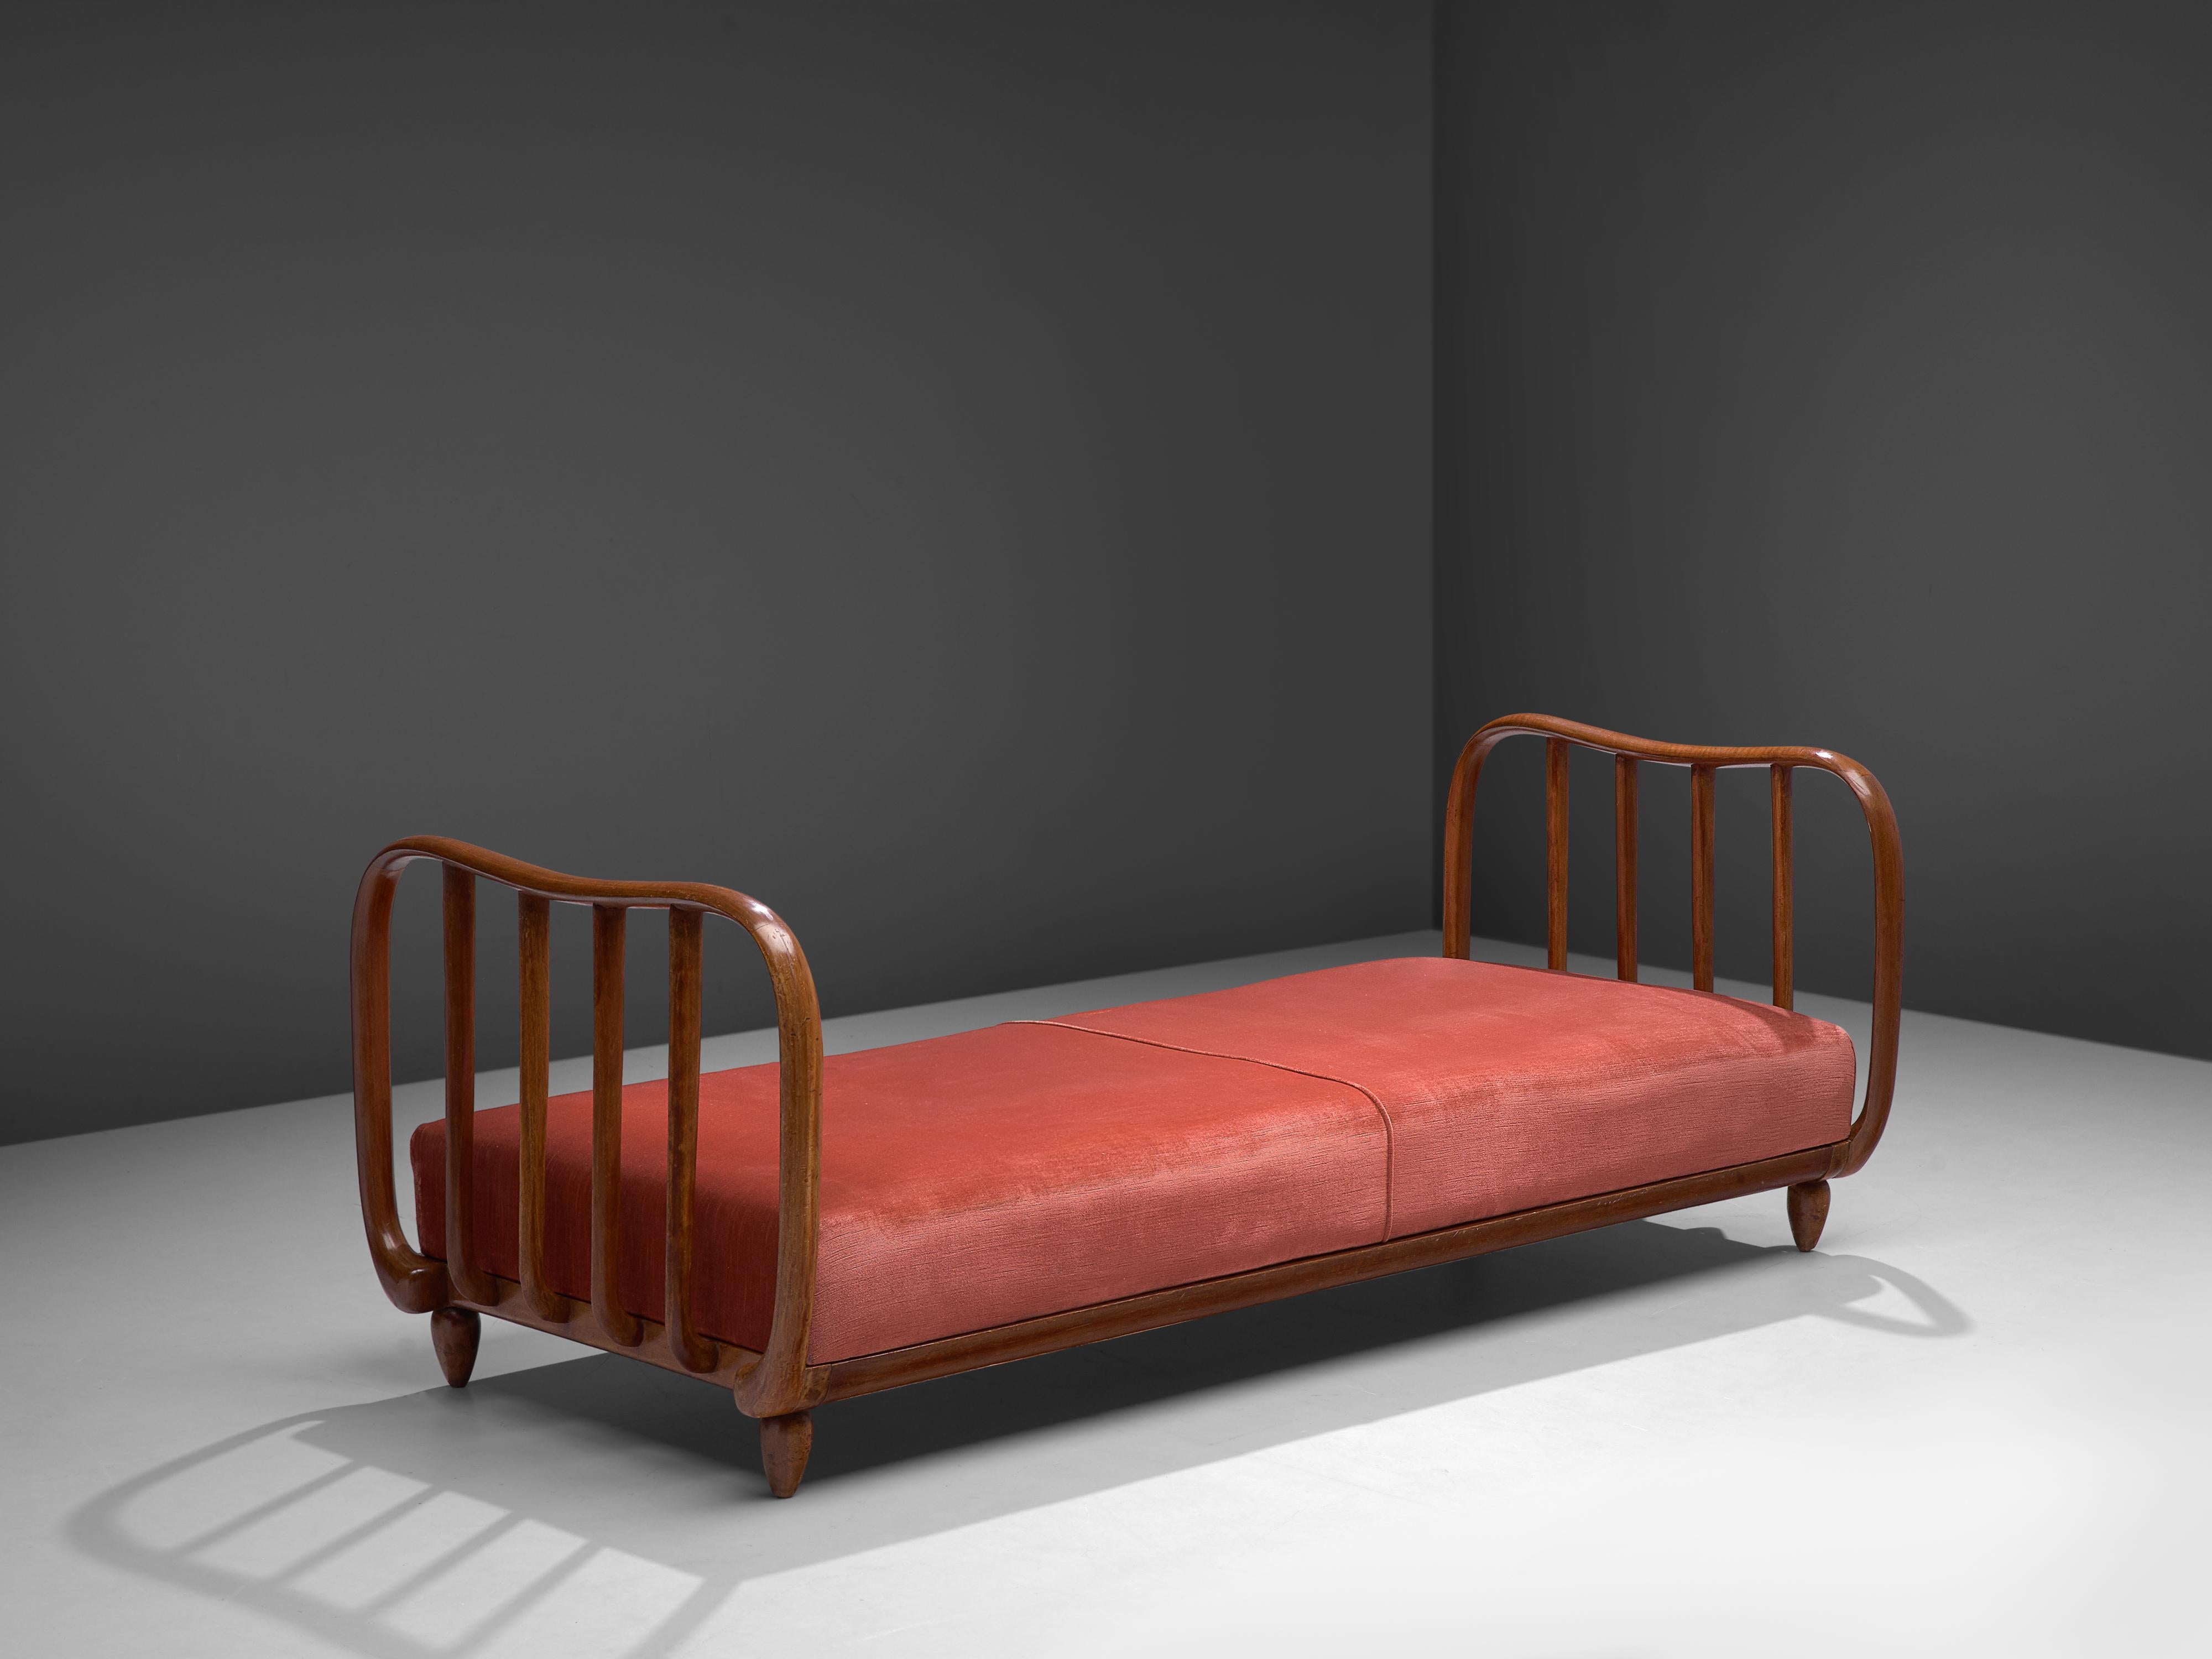 Daybed / bed, wood, velvet, Italy, 1940s

This eloquent daybed alludes to the stylistics traits of the artistic Art Deco movement of the 1940s. The whole unit feels unified and simplistic by means of the curved shapes and round edges of the borders